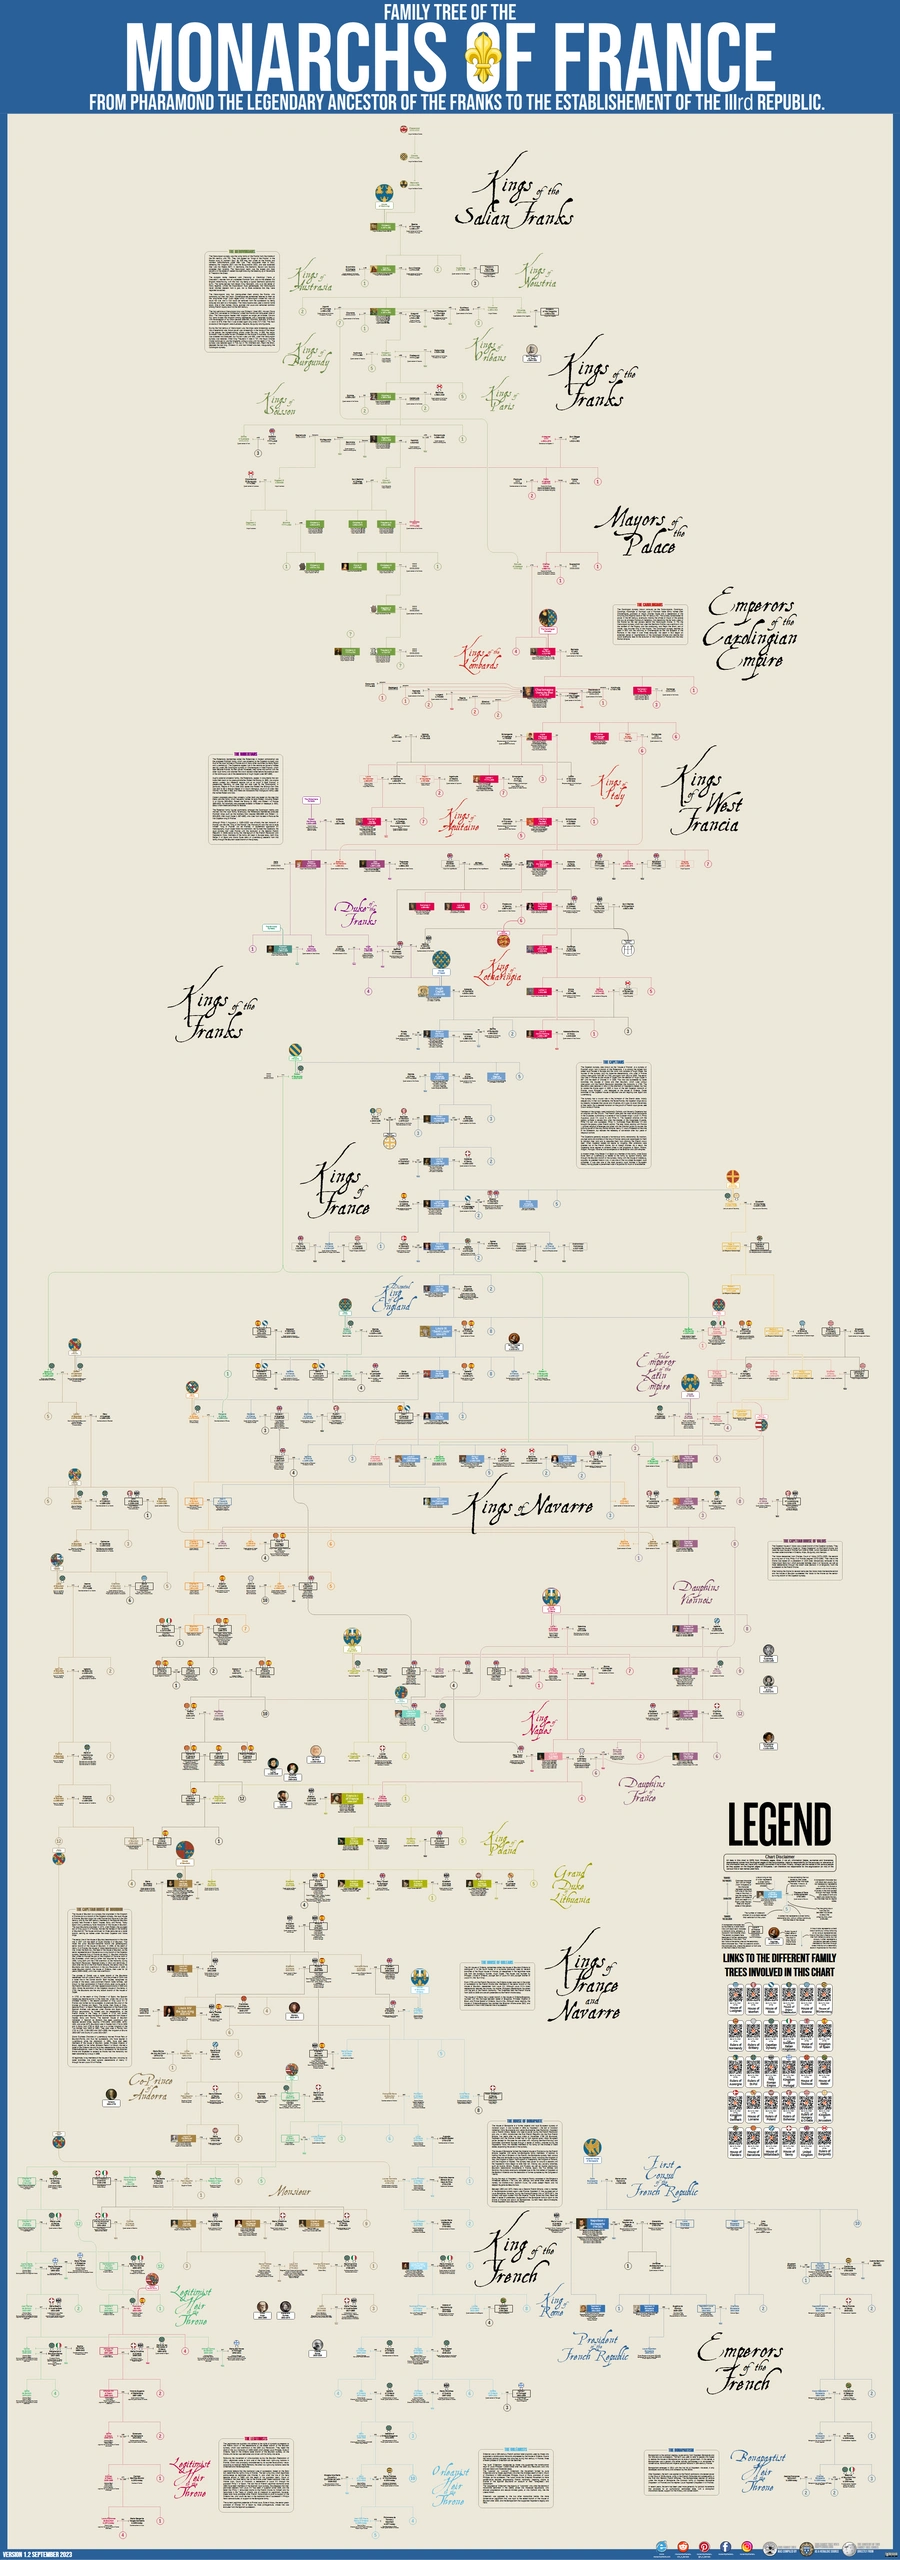 CHART, FAMILY TREE OF THE MONARCHS OF FRANCE.